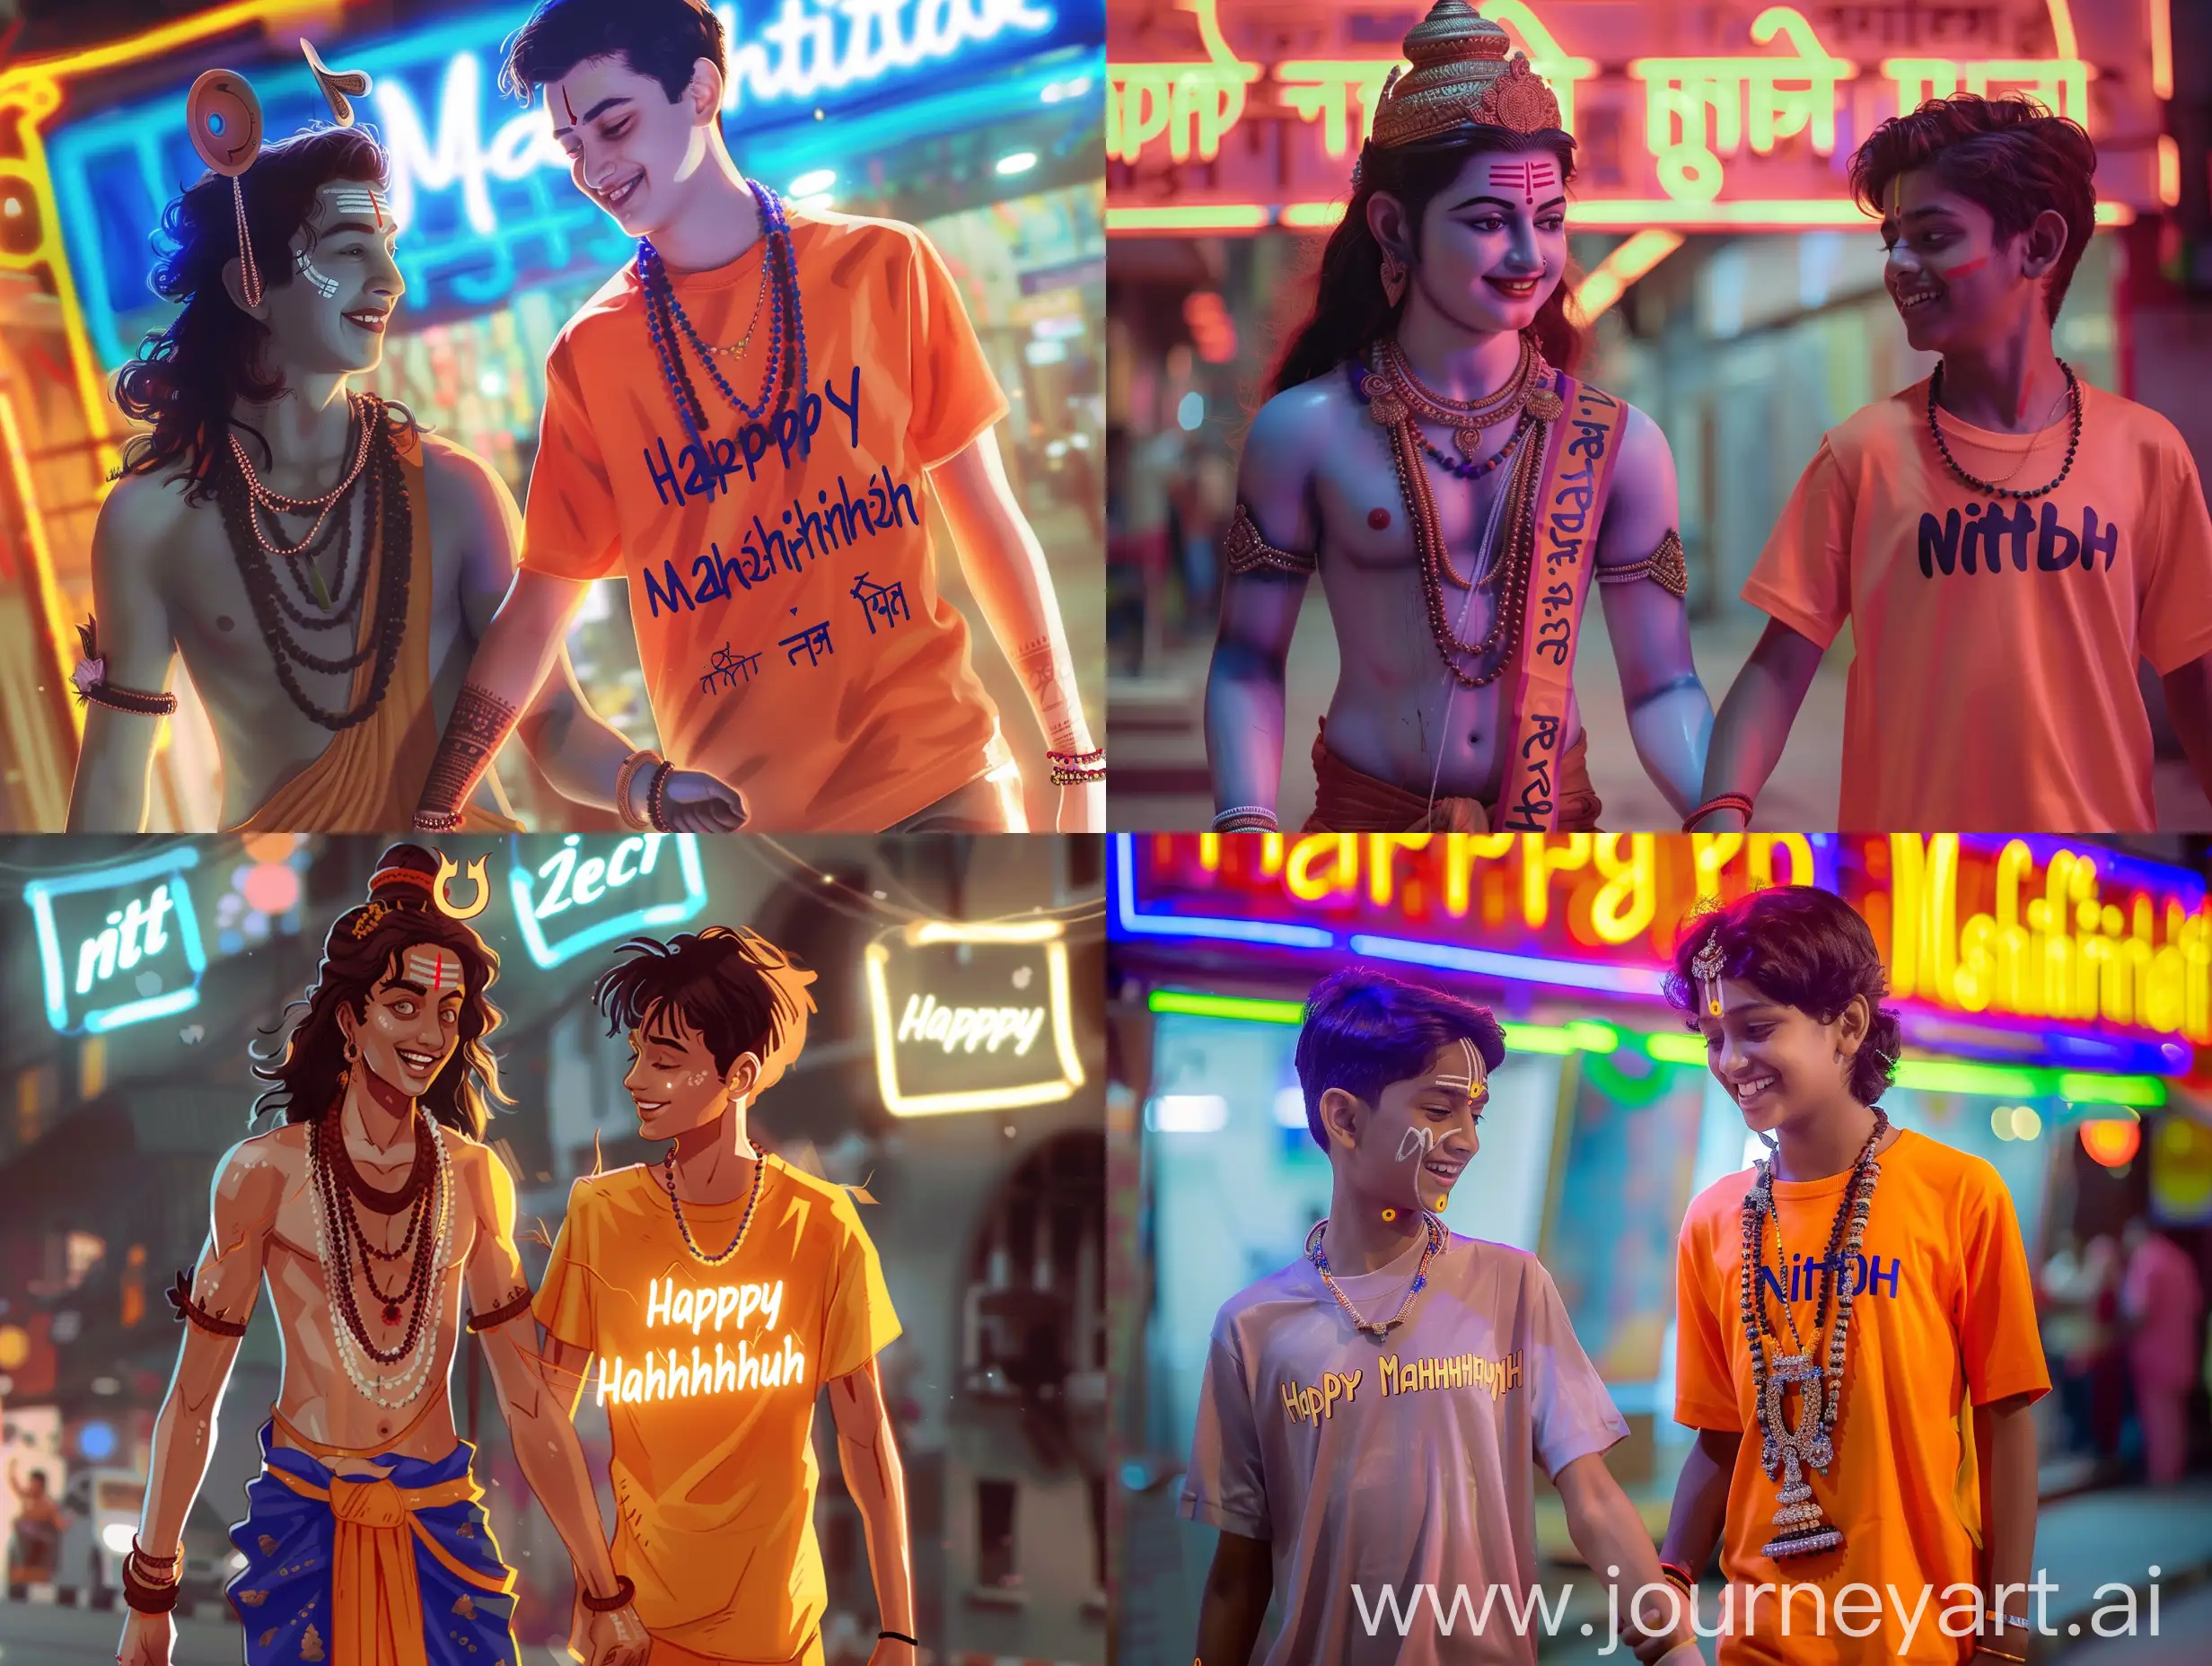 " Create an illusion the 15 year old boy closeup of lord Mahadev holding hand walking with a 20 year old boy wearing a saffron tshirt written name " Nitish " Big and capital font. both smiling. Background neon labels proudly display the caption " Happy Mahashivratri " , soft light reflection